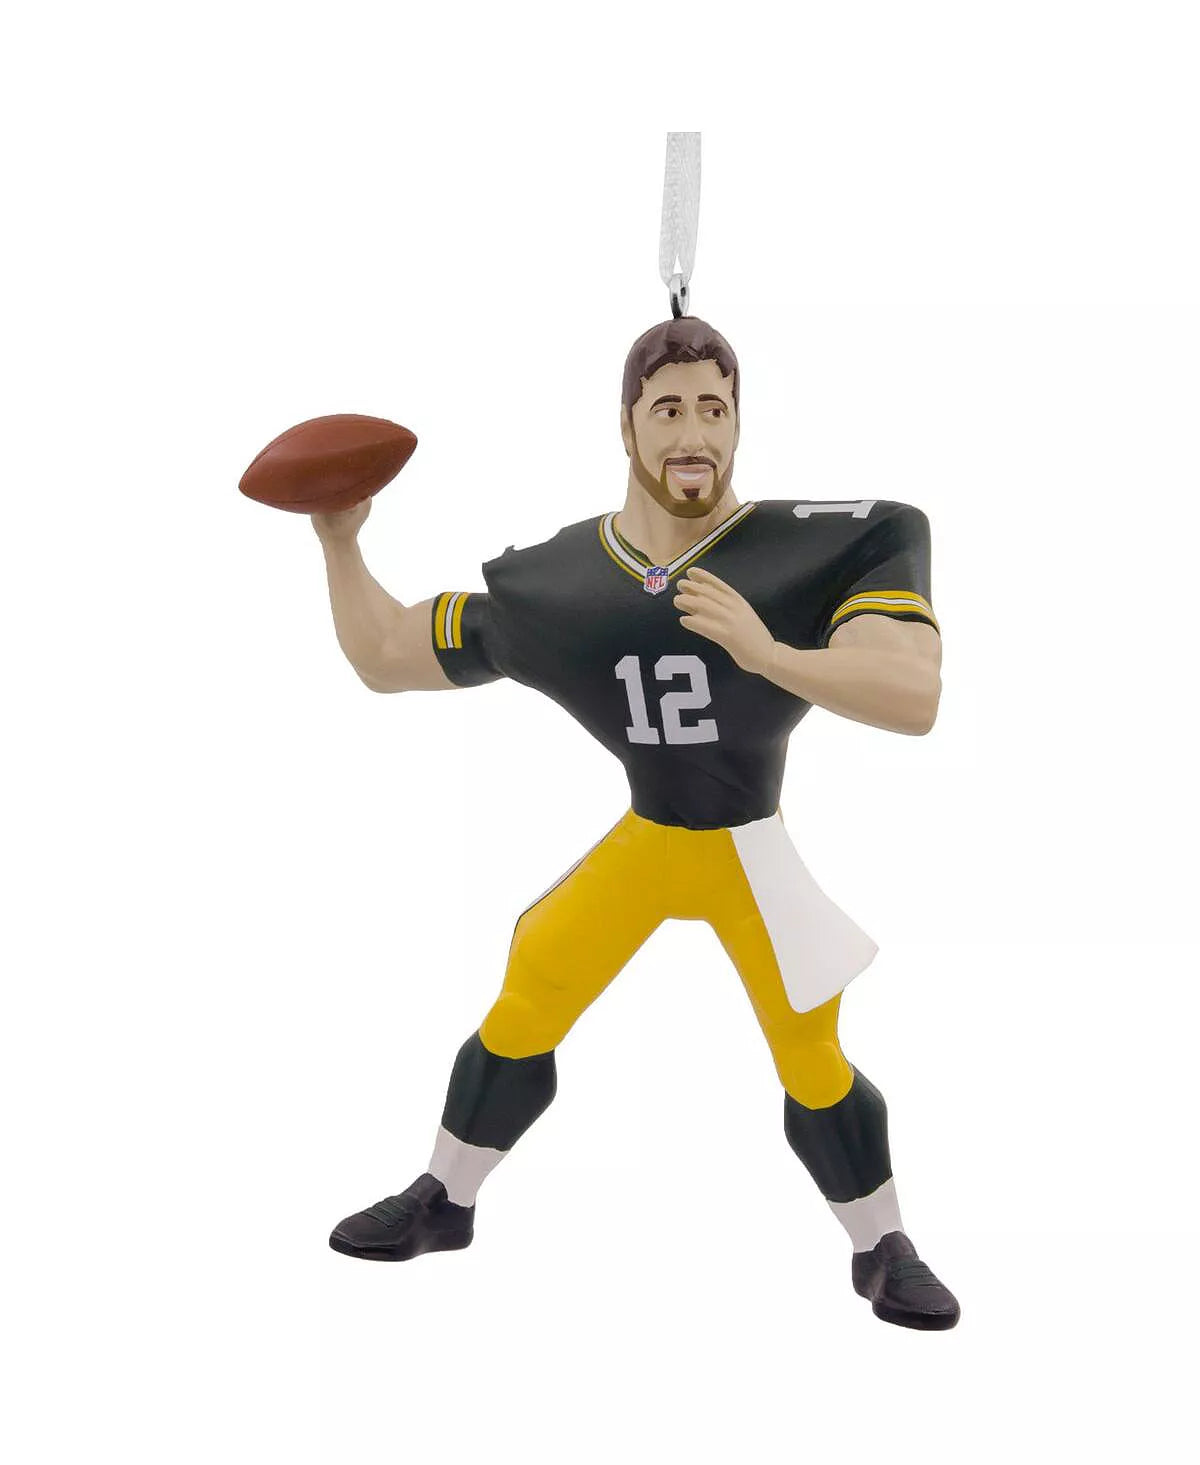 NFL Aaron Rodgers Green Bay Packers Ornament